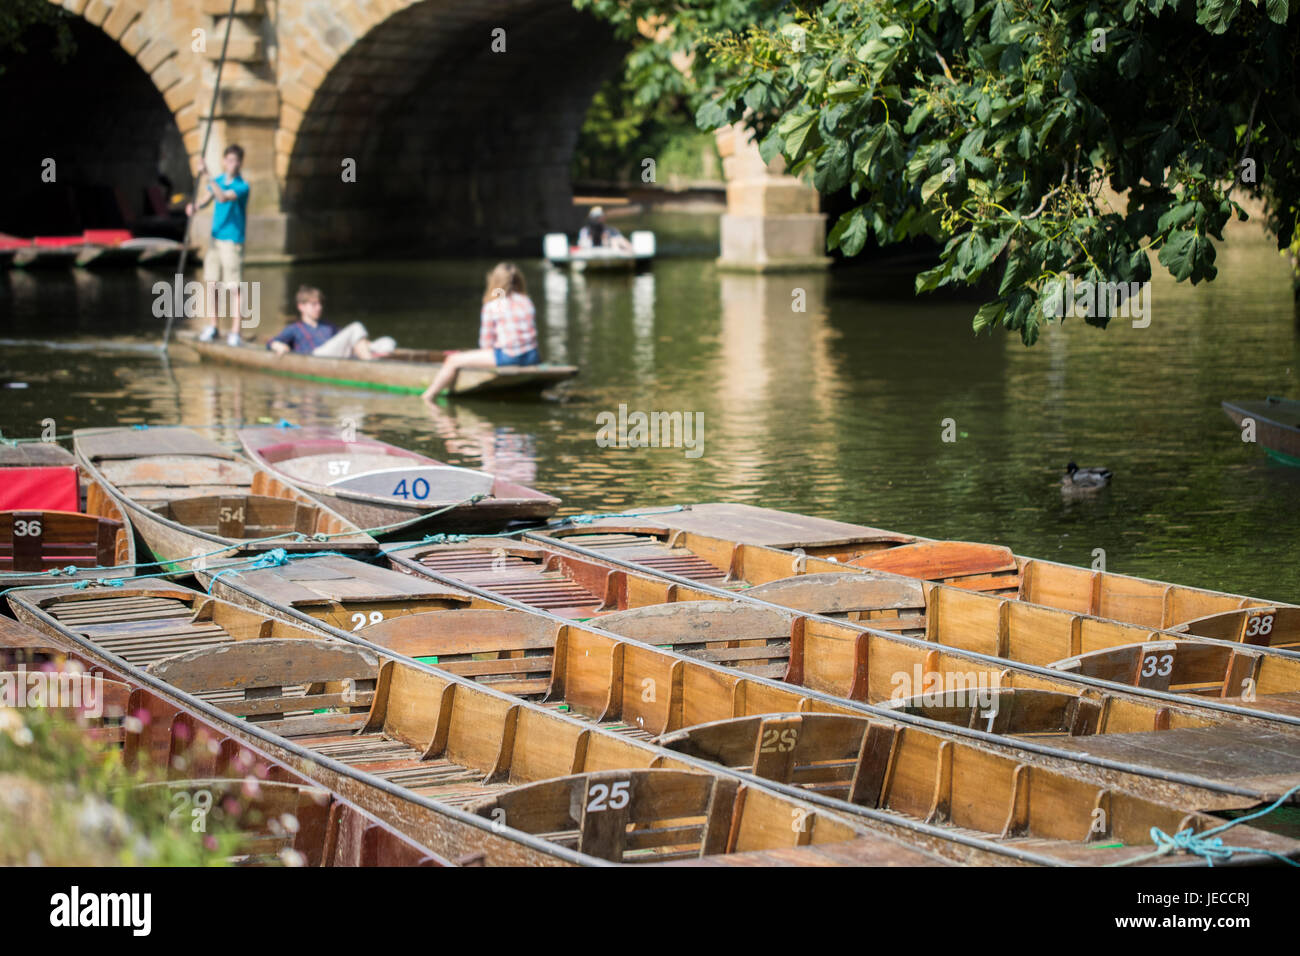 Boating In Punts On River Cherwell In Oxford Stock Photo